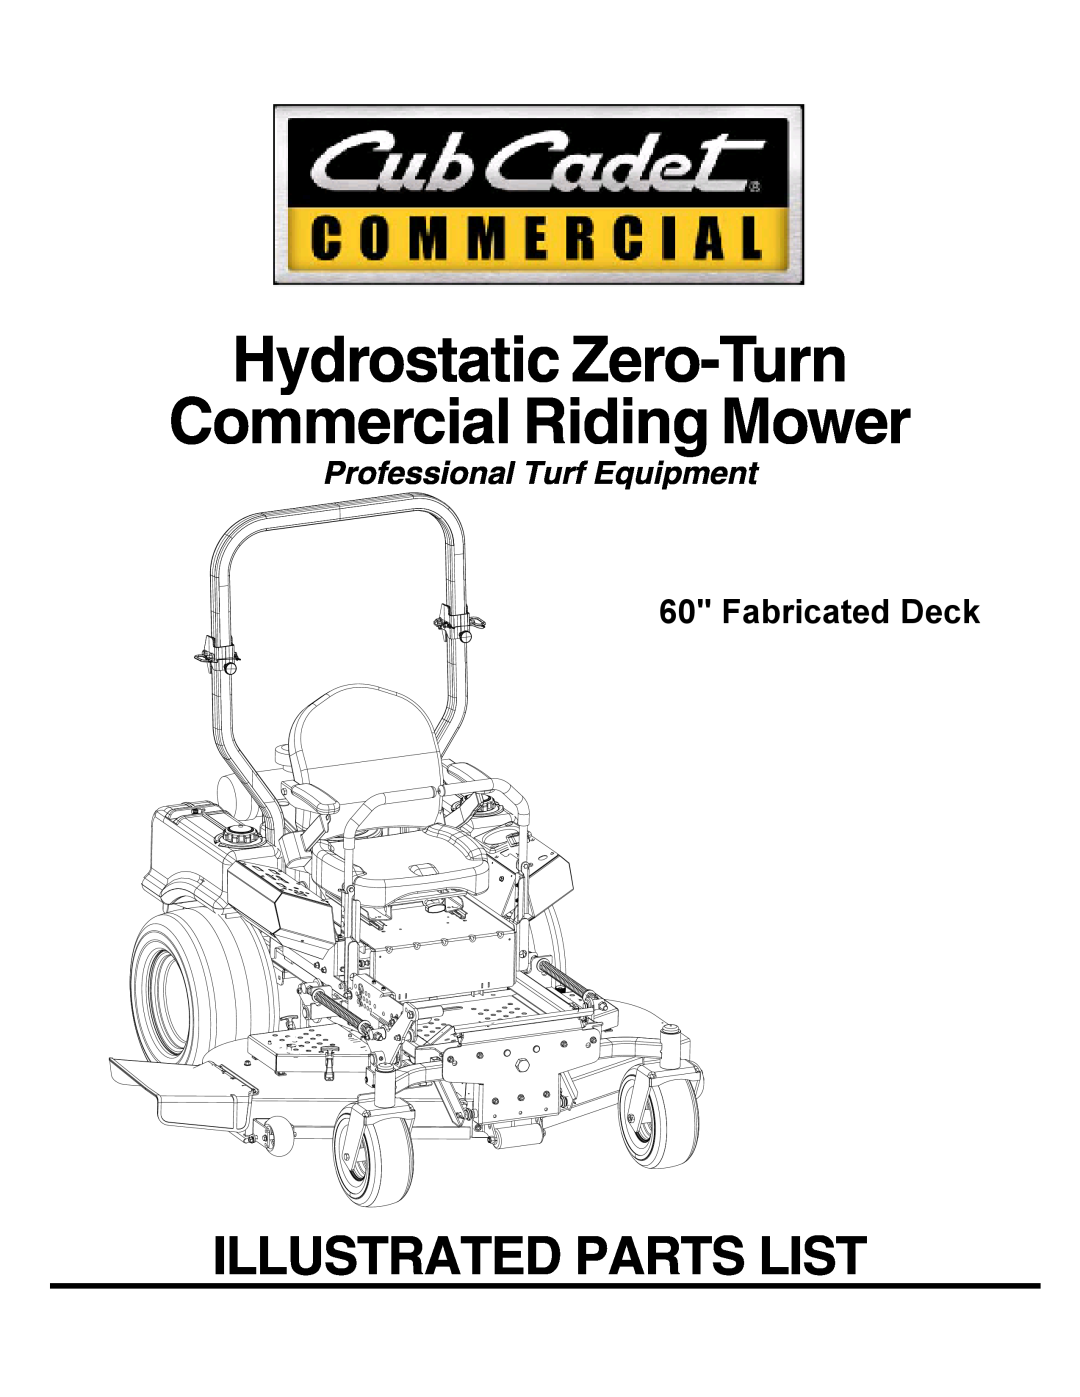 Cub Cadet 53AH8CTX750 manual Hydrostatic Zero-Turn Commercial Riding Mower, Illustrated Parts List, Fabricated Deck 